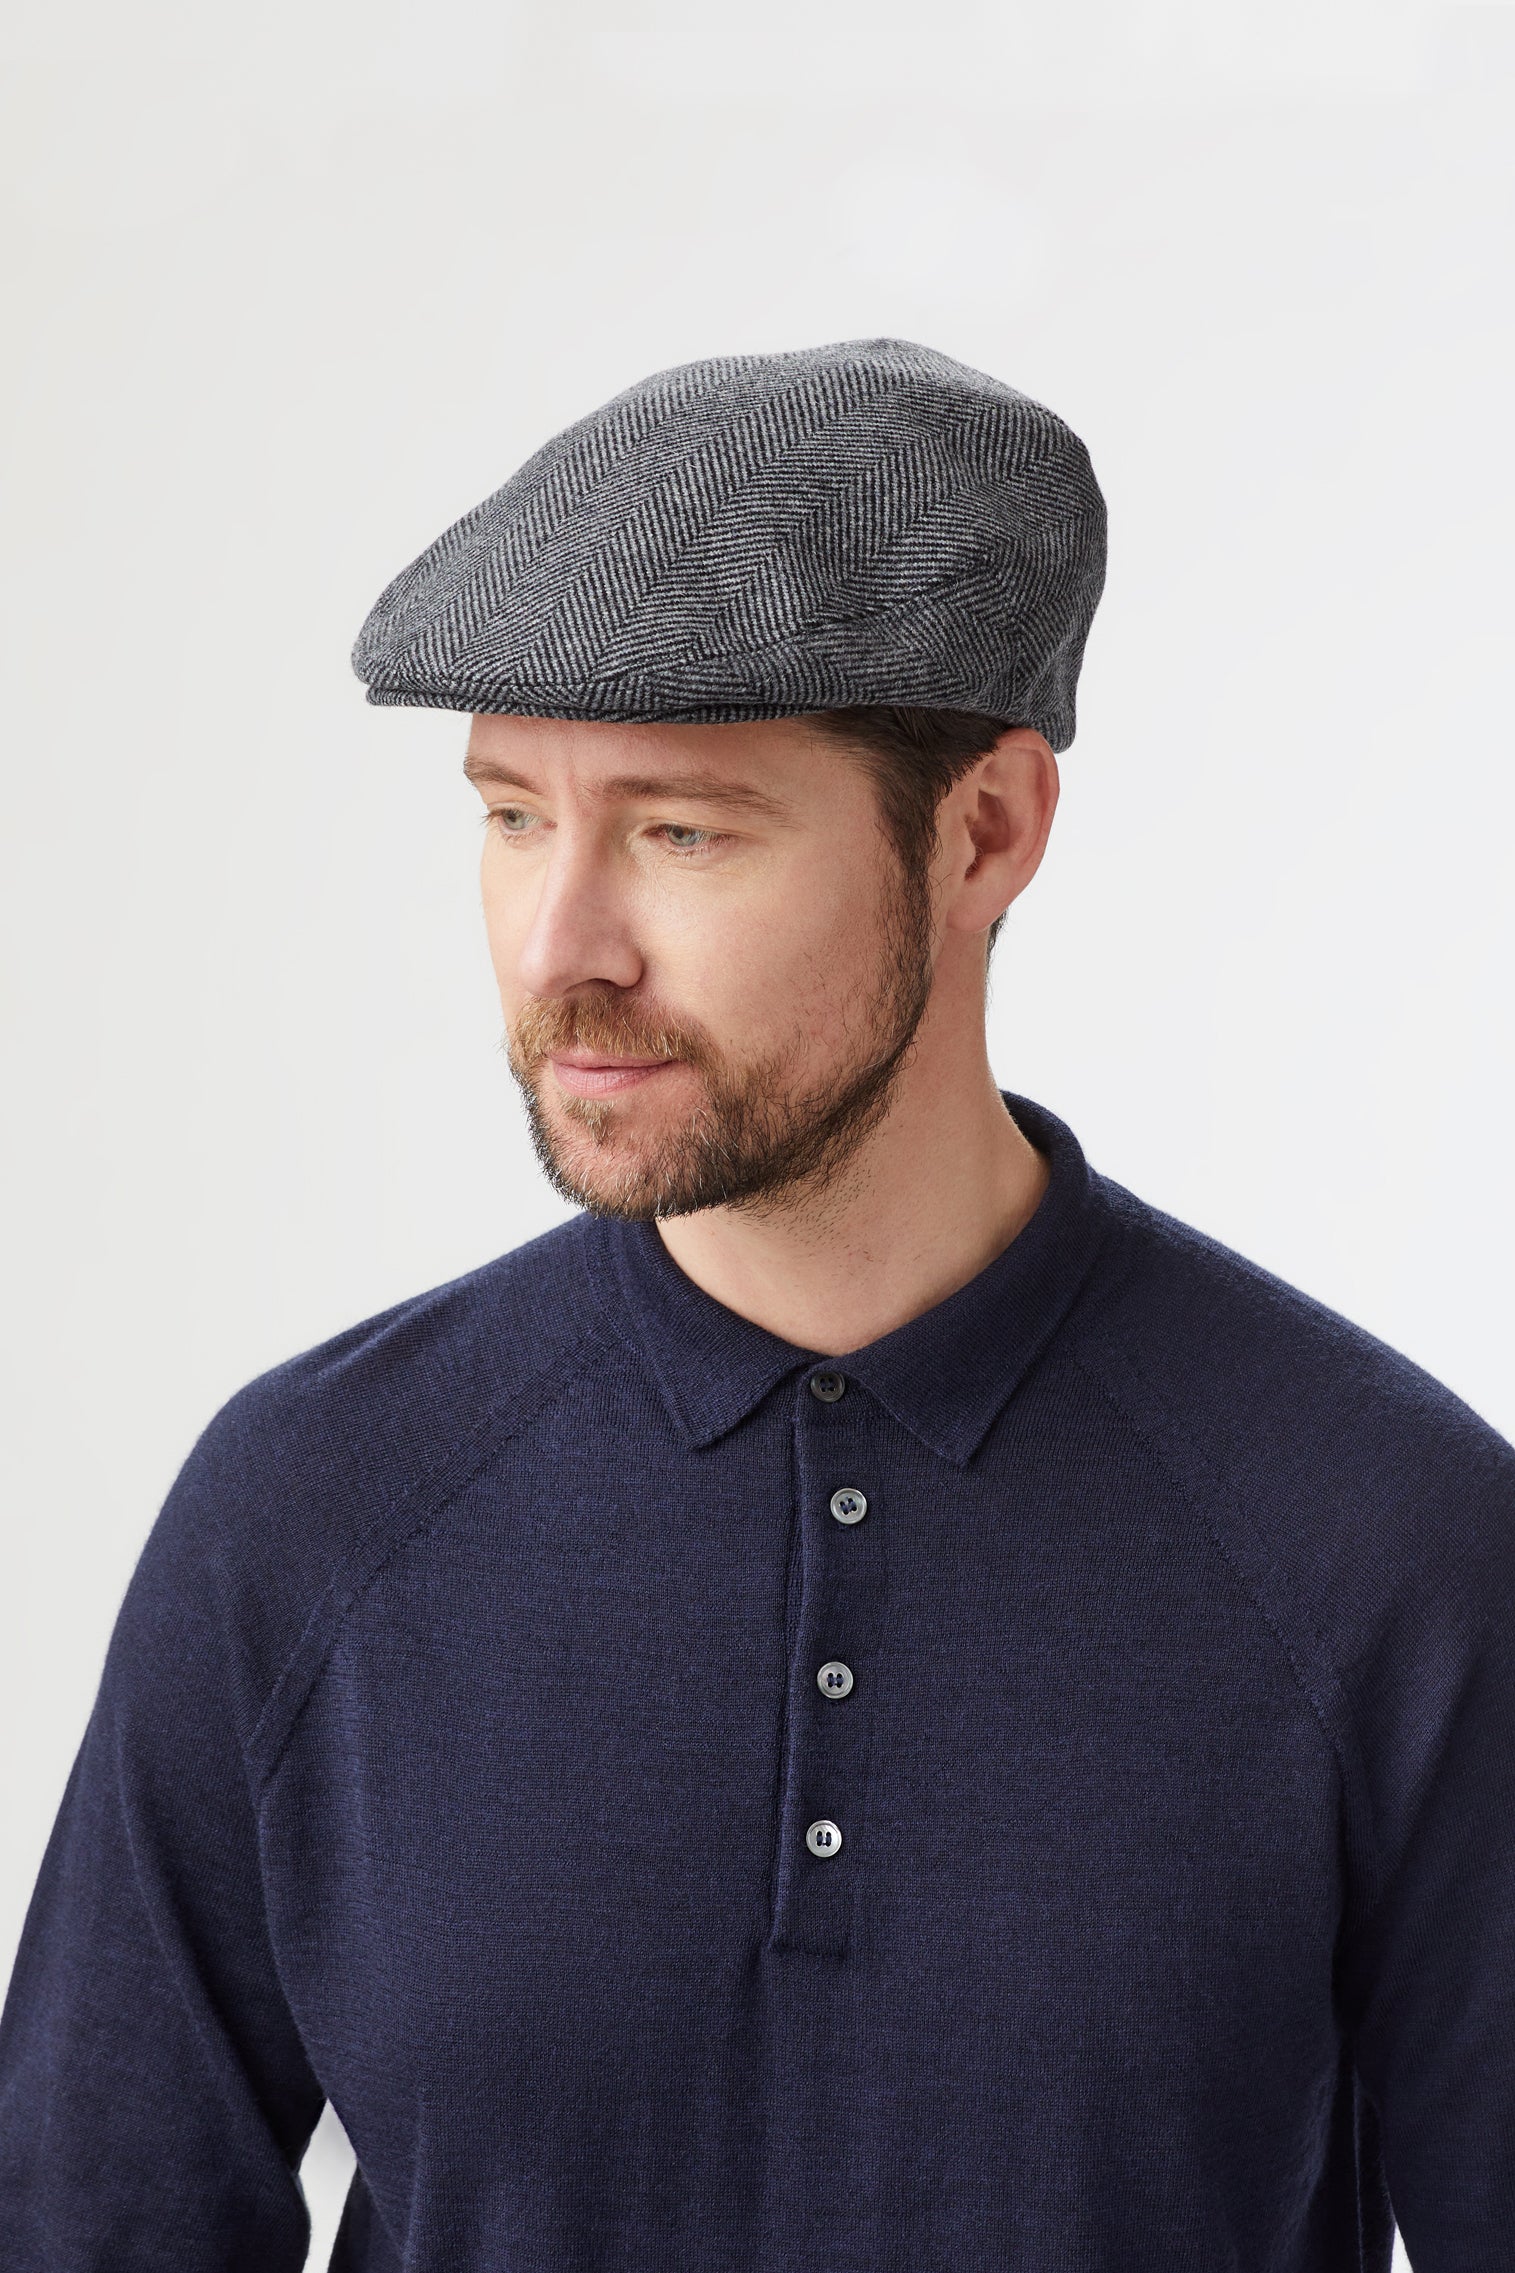 Gill flat cap - Products - Lock & Co. Hatters London UK